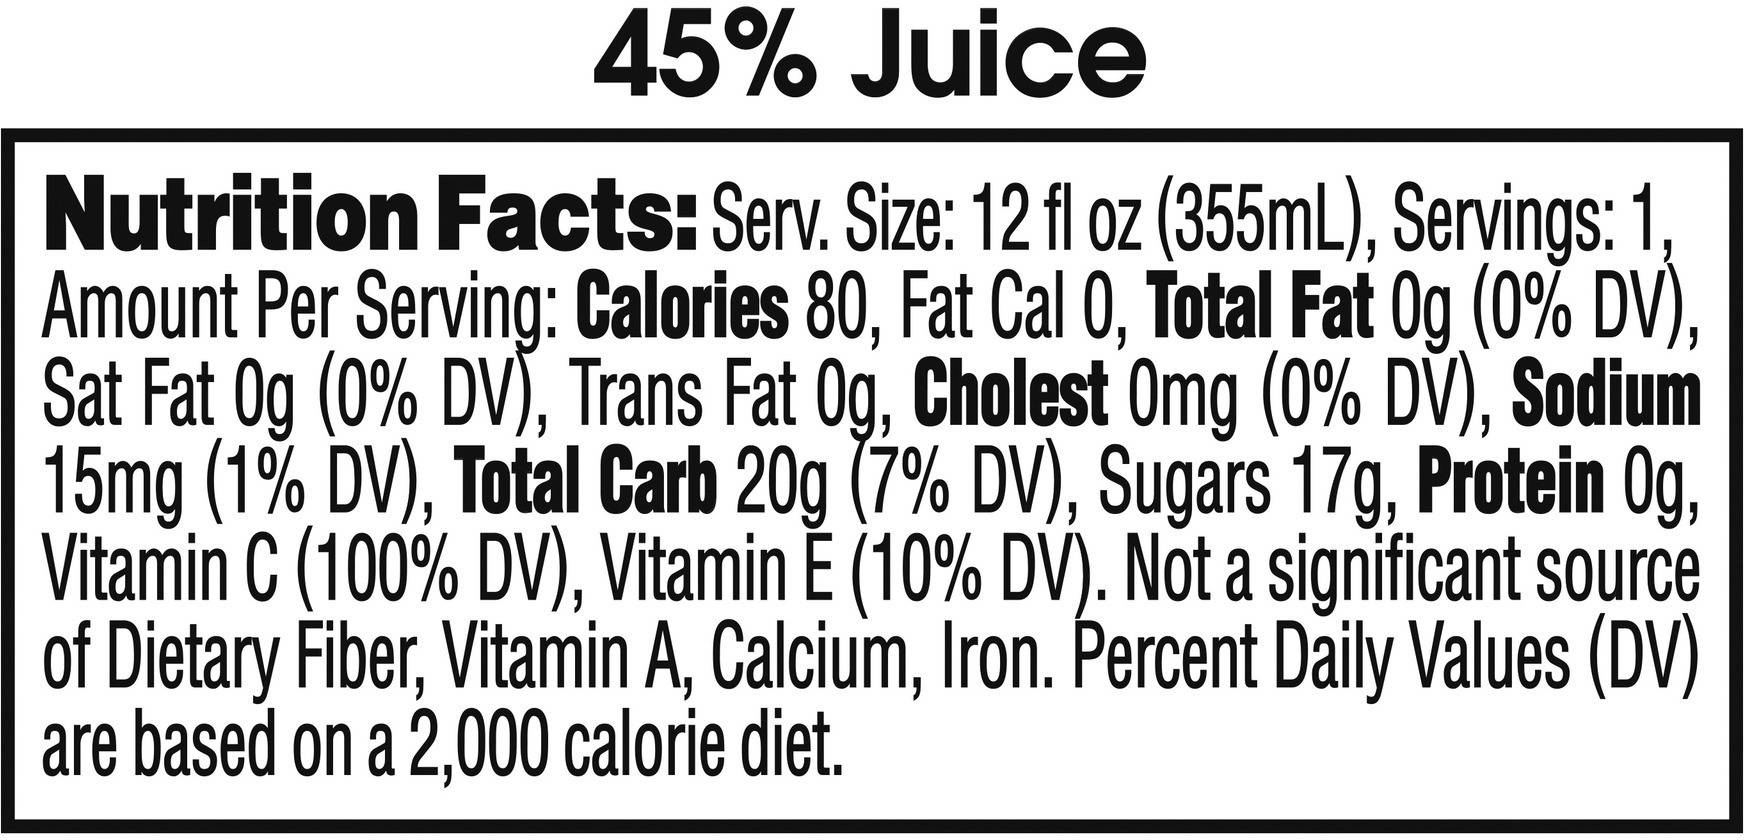 Image describing nutrition information for product Tropicana 50 Pomegranate Blueberry